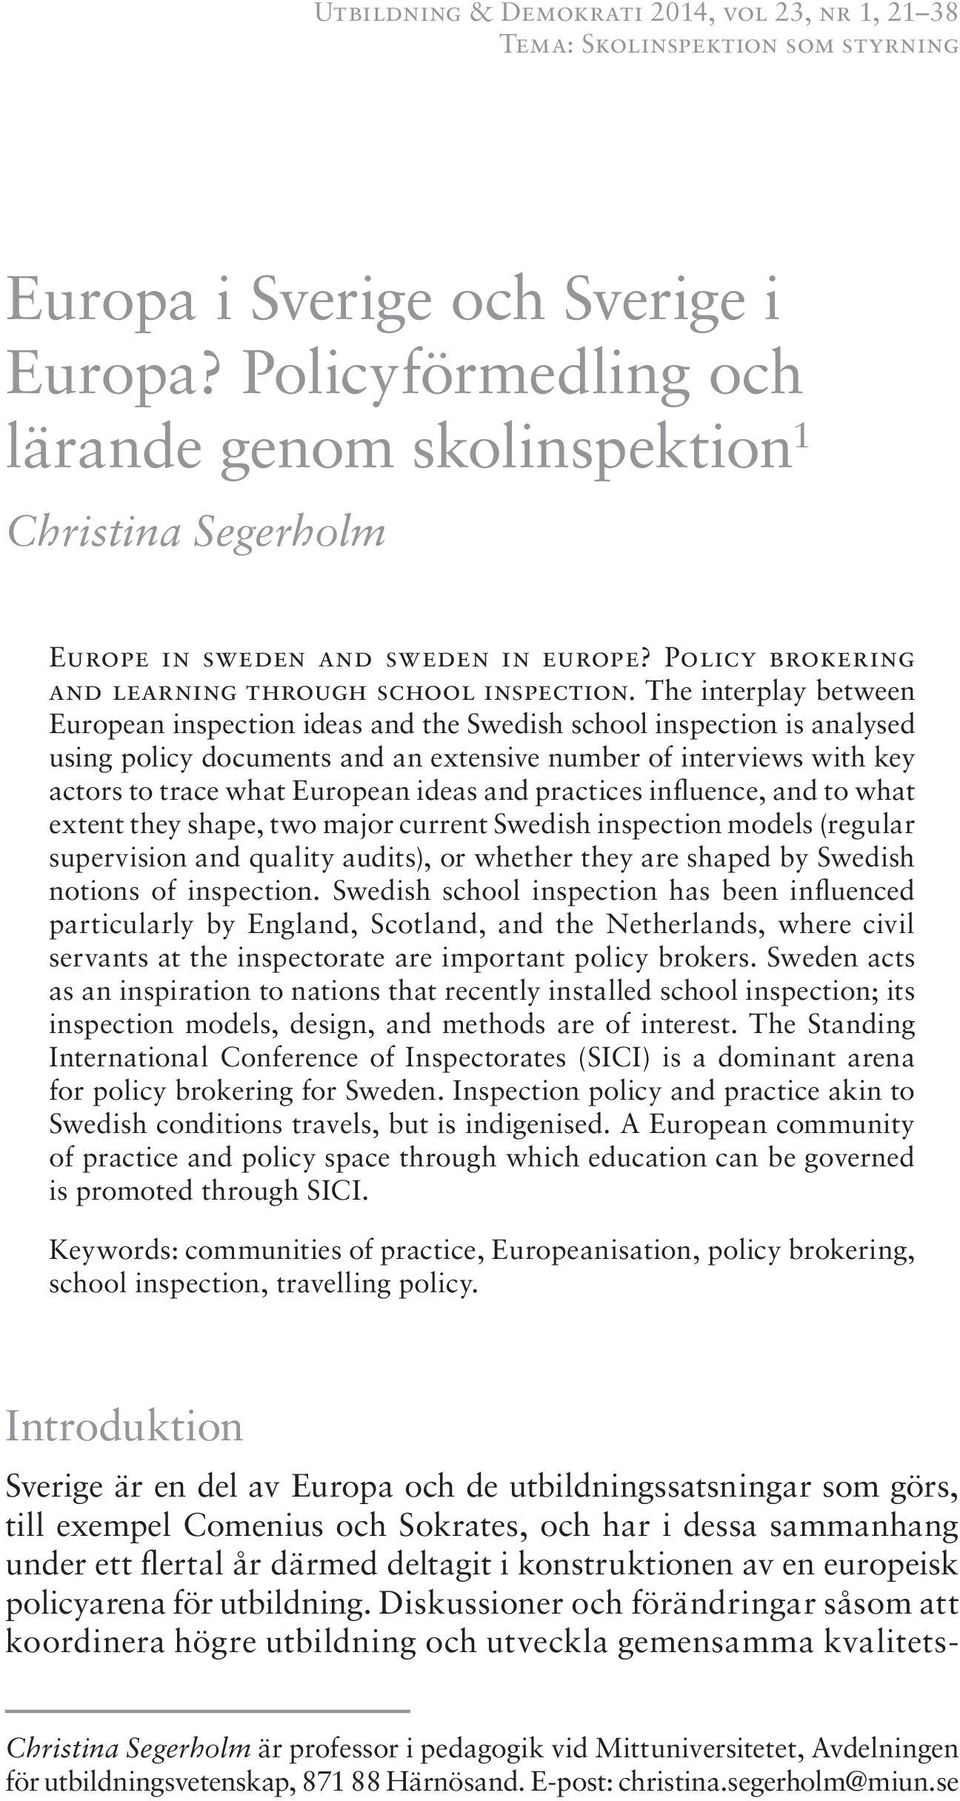 The interplay between European inspection ideas and the Swedish school inspection is analysed using policy documents and an extensive number of interviews with key actors to trace what European ideas